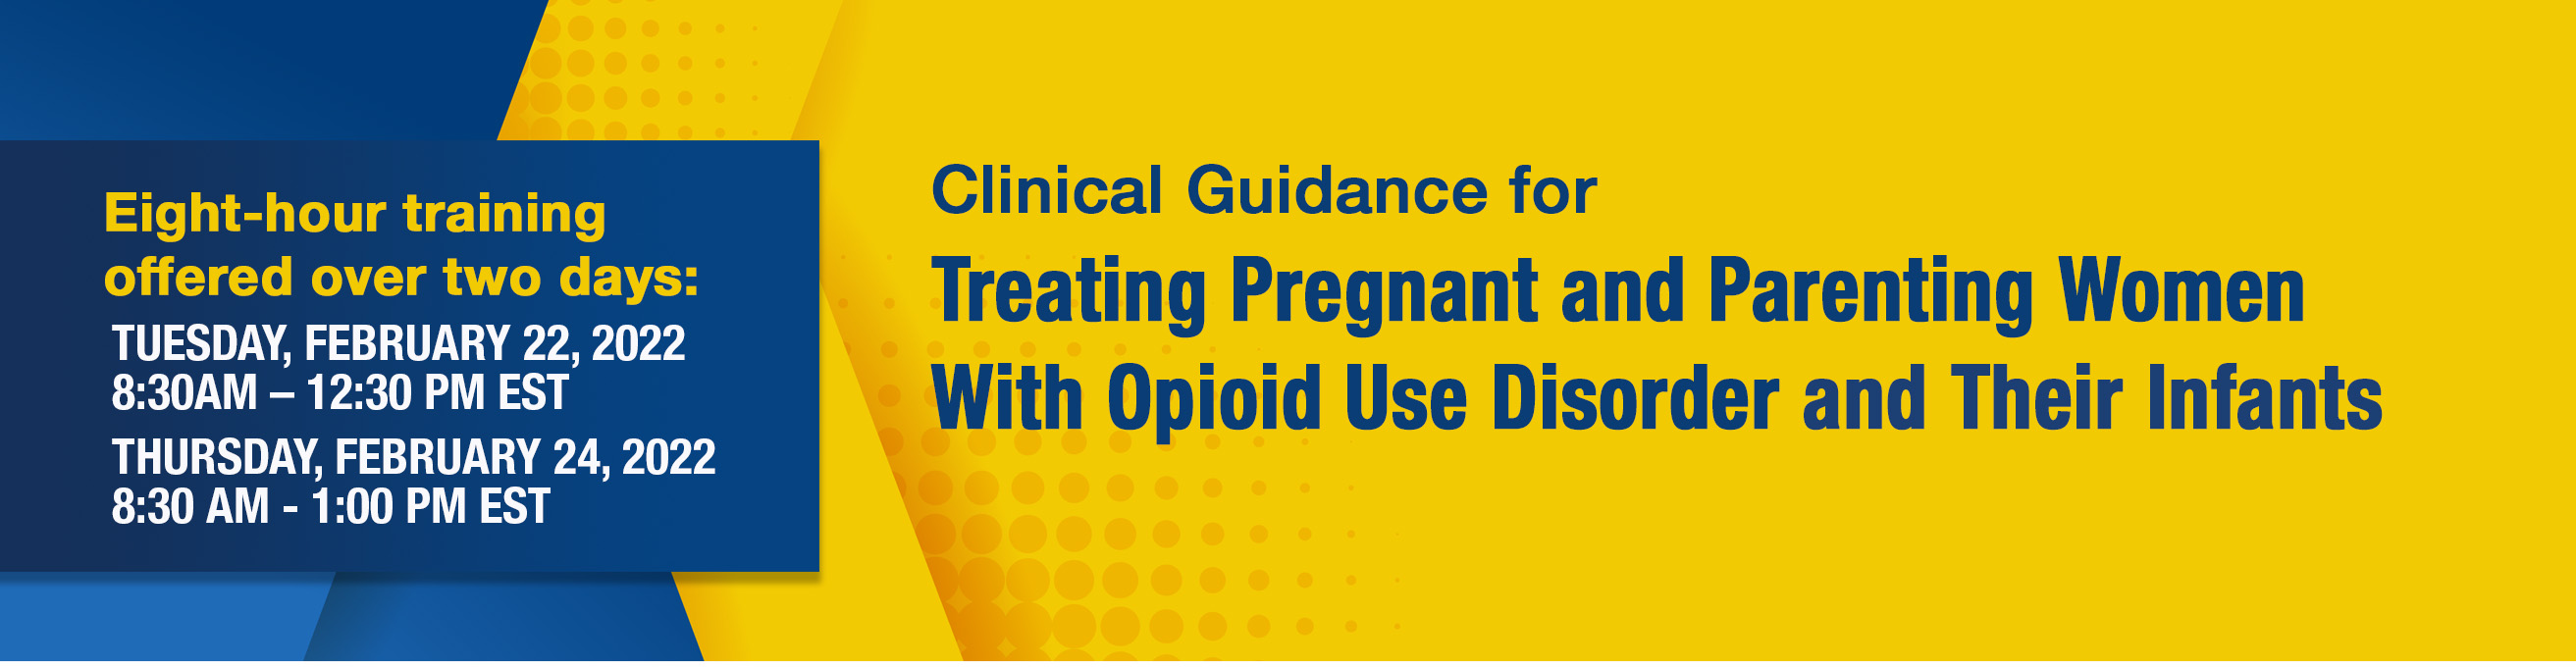 Clinical Guidance Training for Treating Pregnant & Parenting Women With Opioid Use Disorder & Their Infants / Eight Hour Traoining Offered Over Two Days: Tuesday, February 22, 2022 - Thursday, February 24, 2022